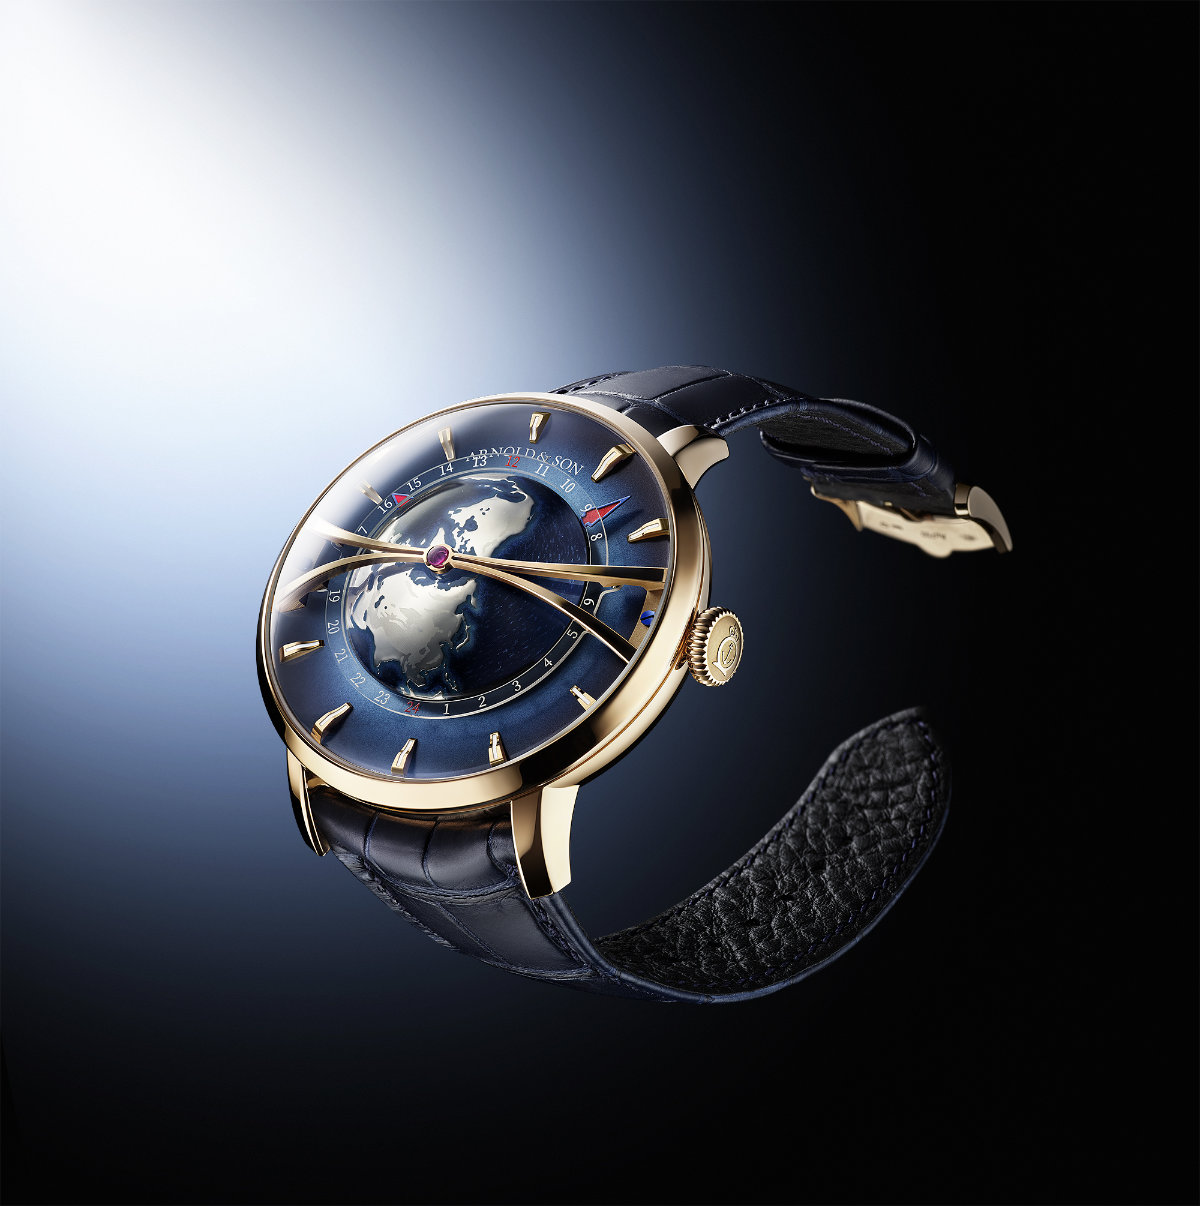 Arnold & Son Introduces Its New Globetrotter Gold Watch